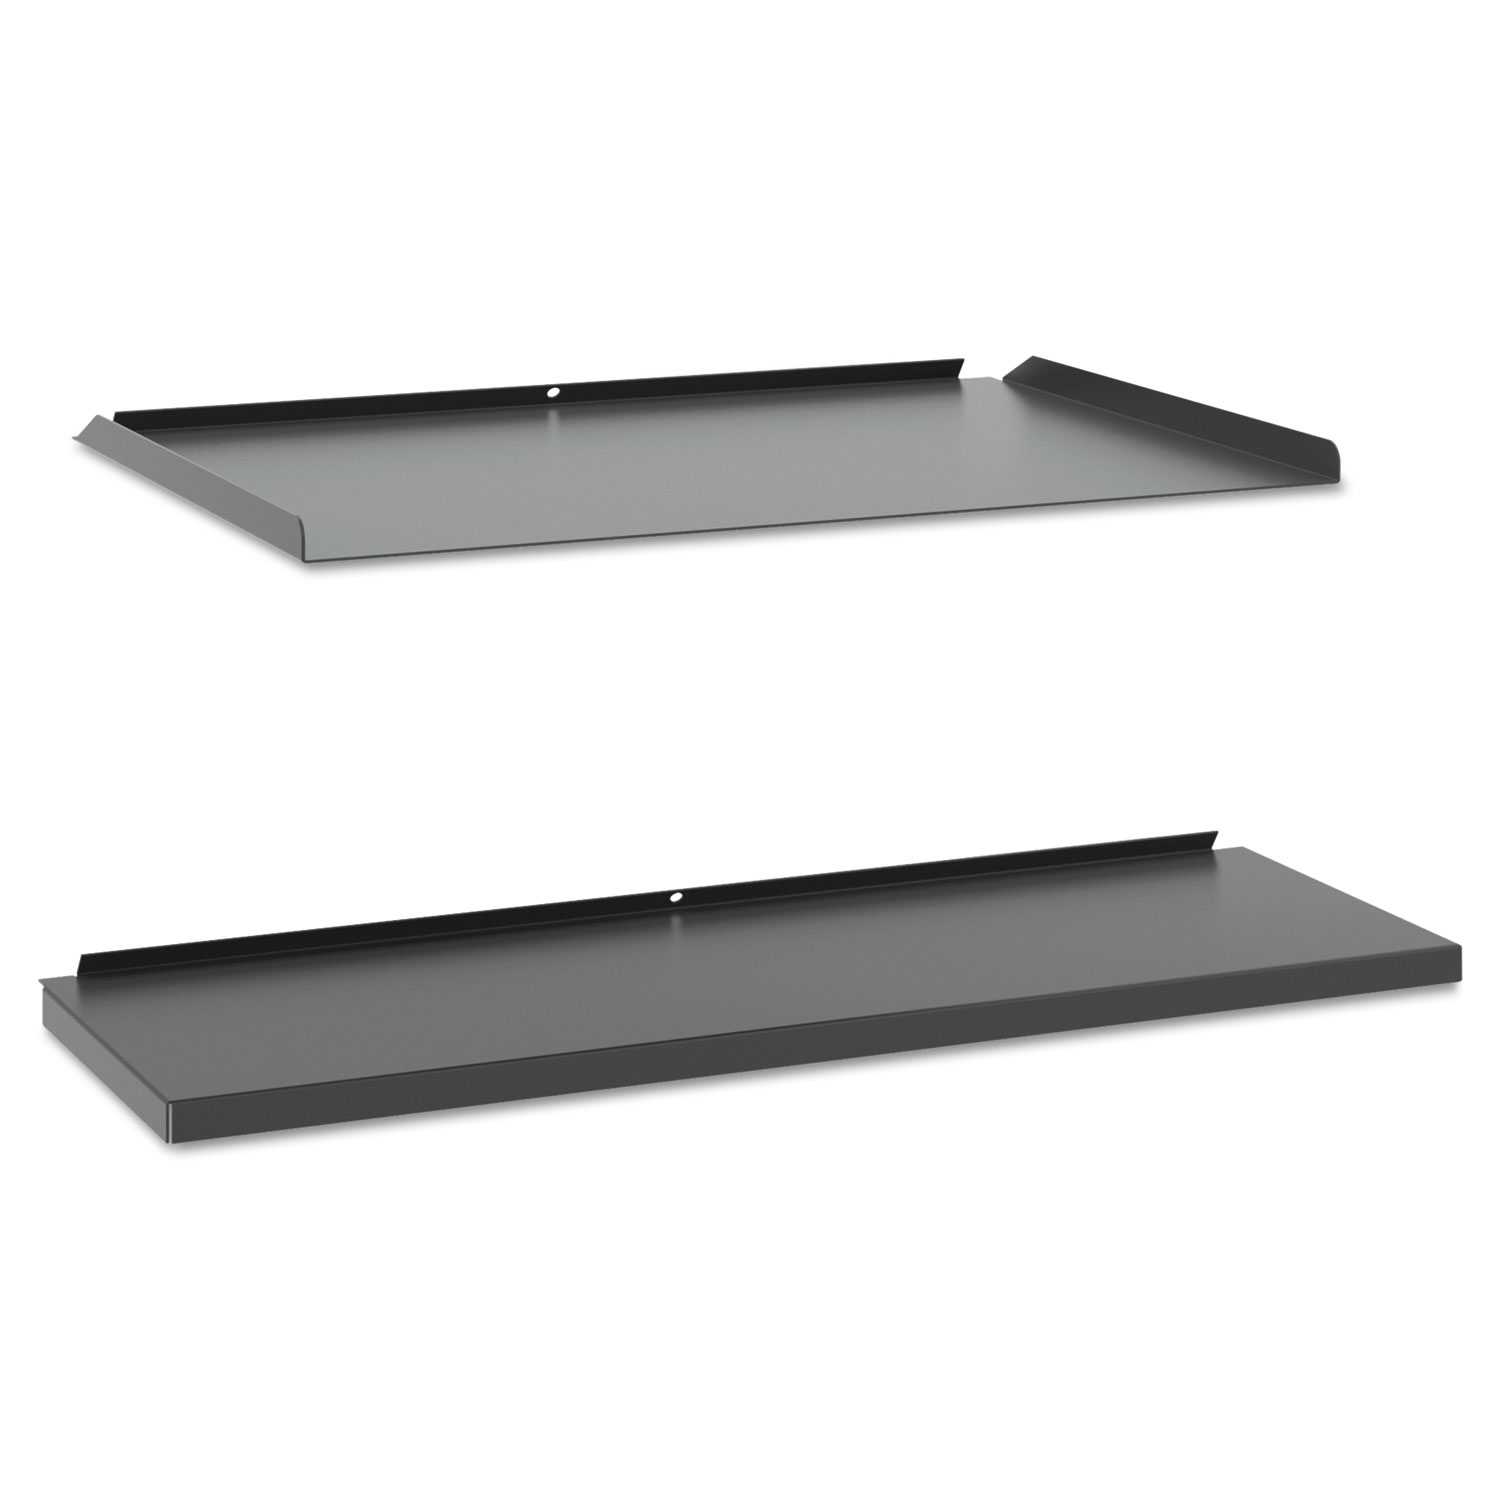 Manage Series Shelf and Tray Kit, Steel, 17-1/2w x 9d x 1h, Ash